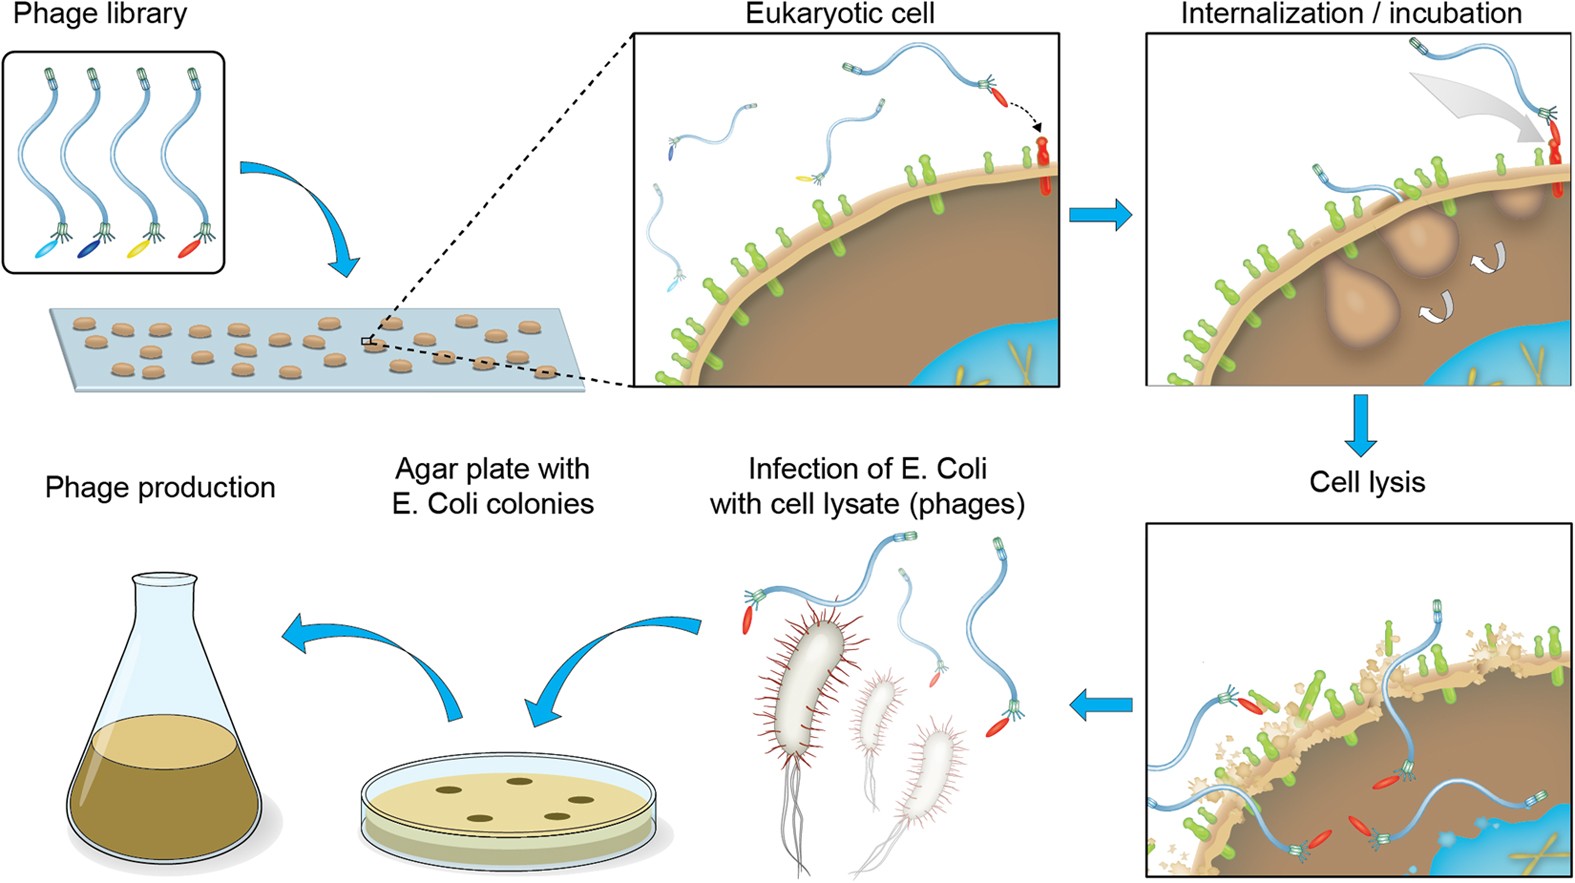 Targeting of phage particles towards endothelial cells by